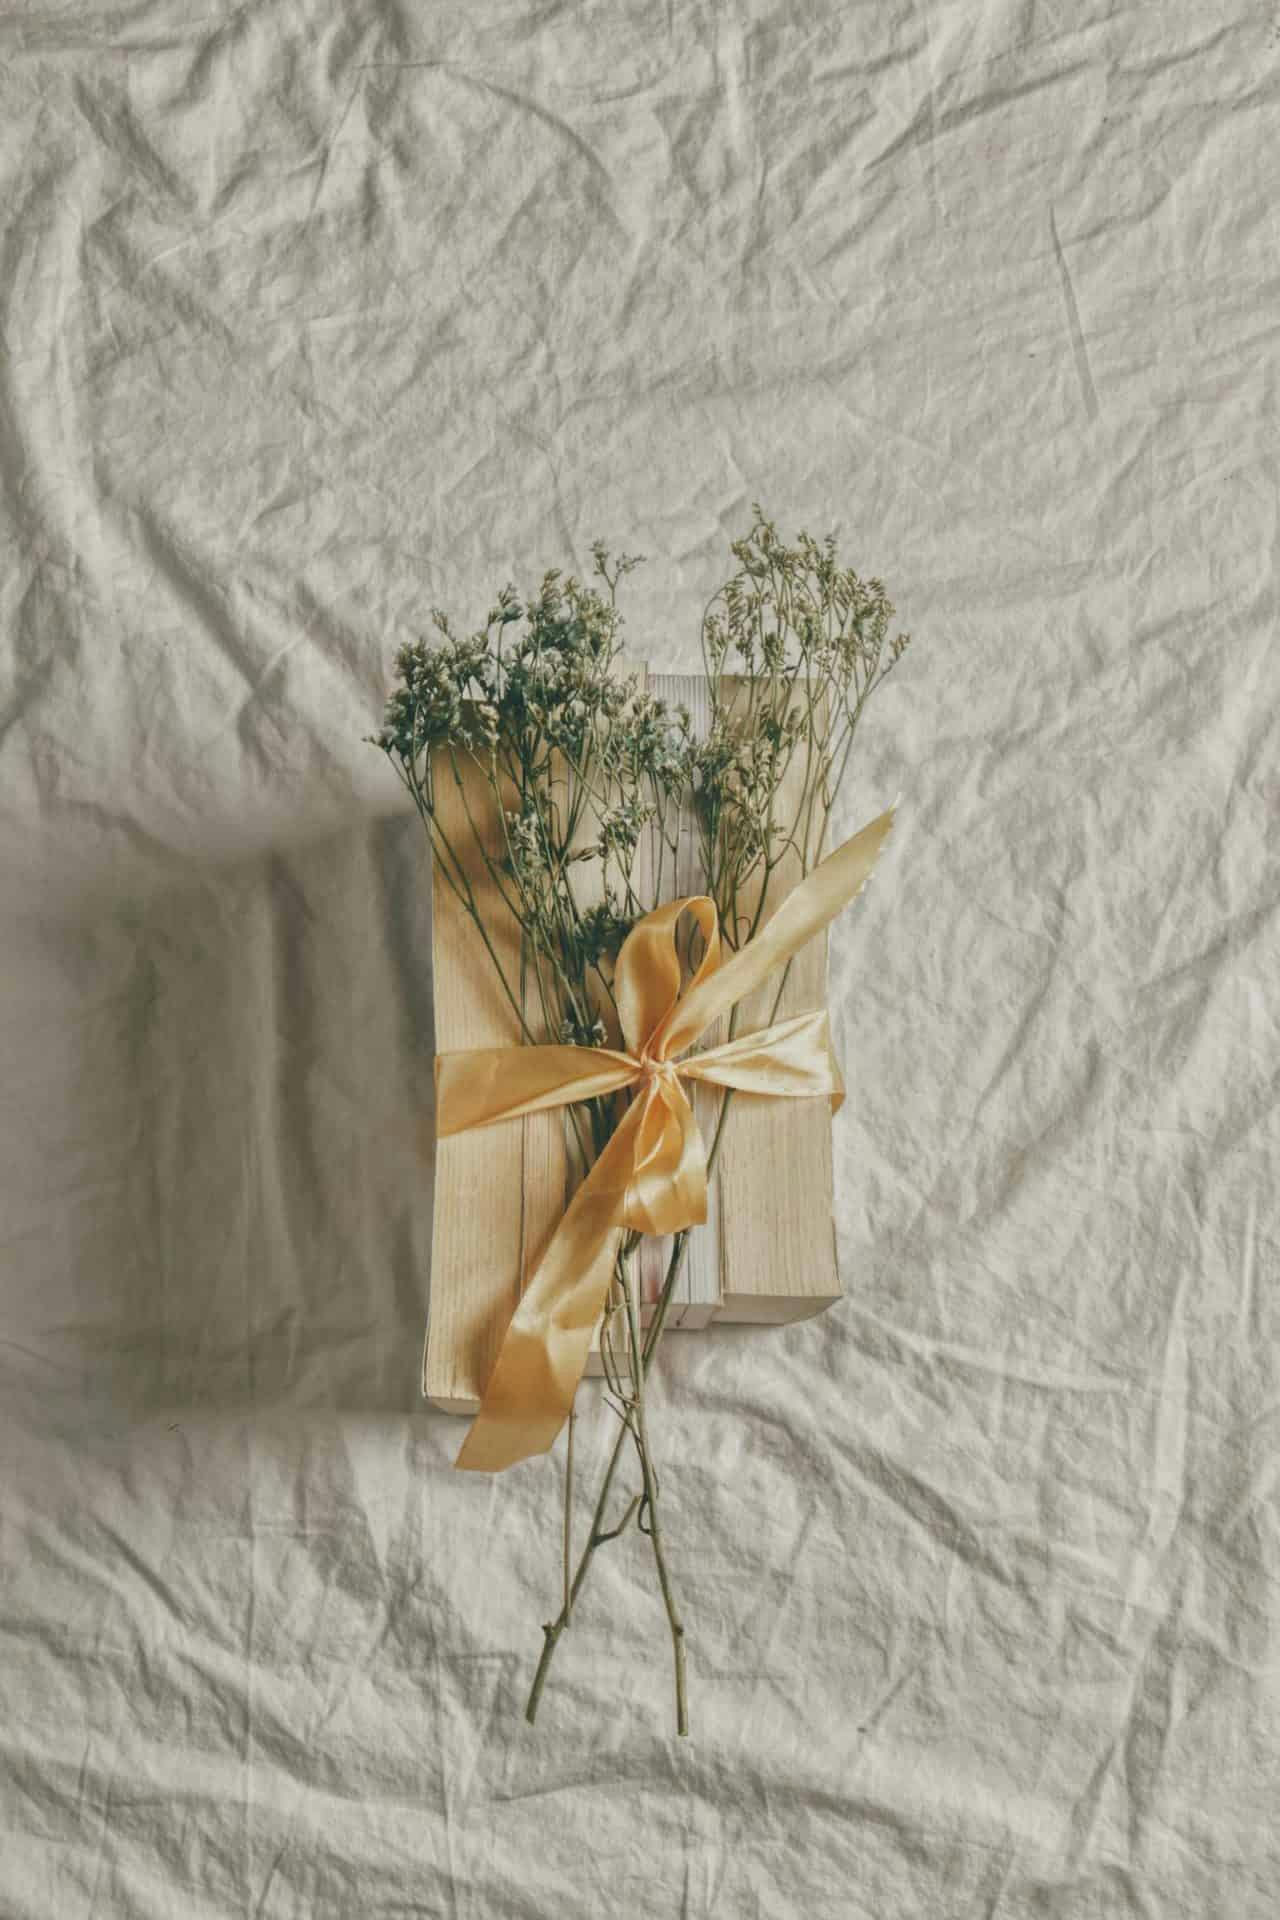 photo of a wrapped gift with plants for decoration